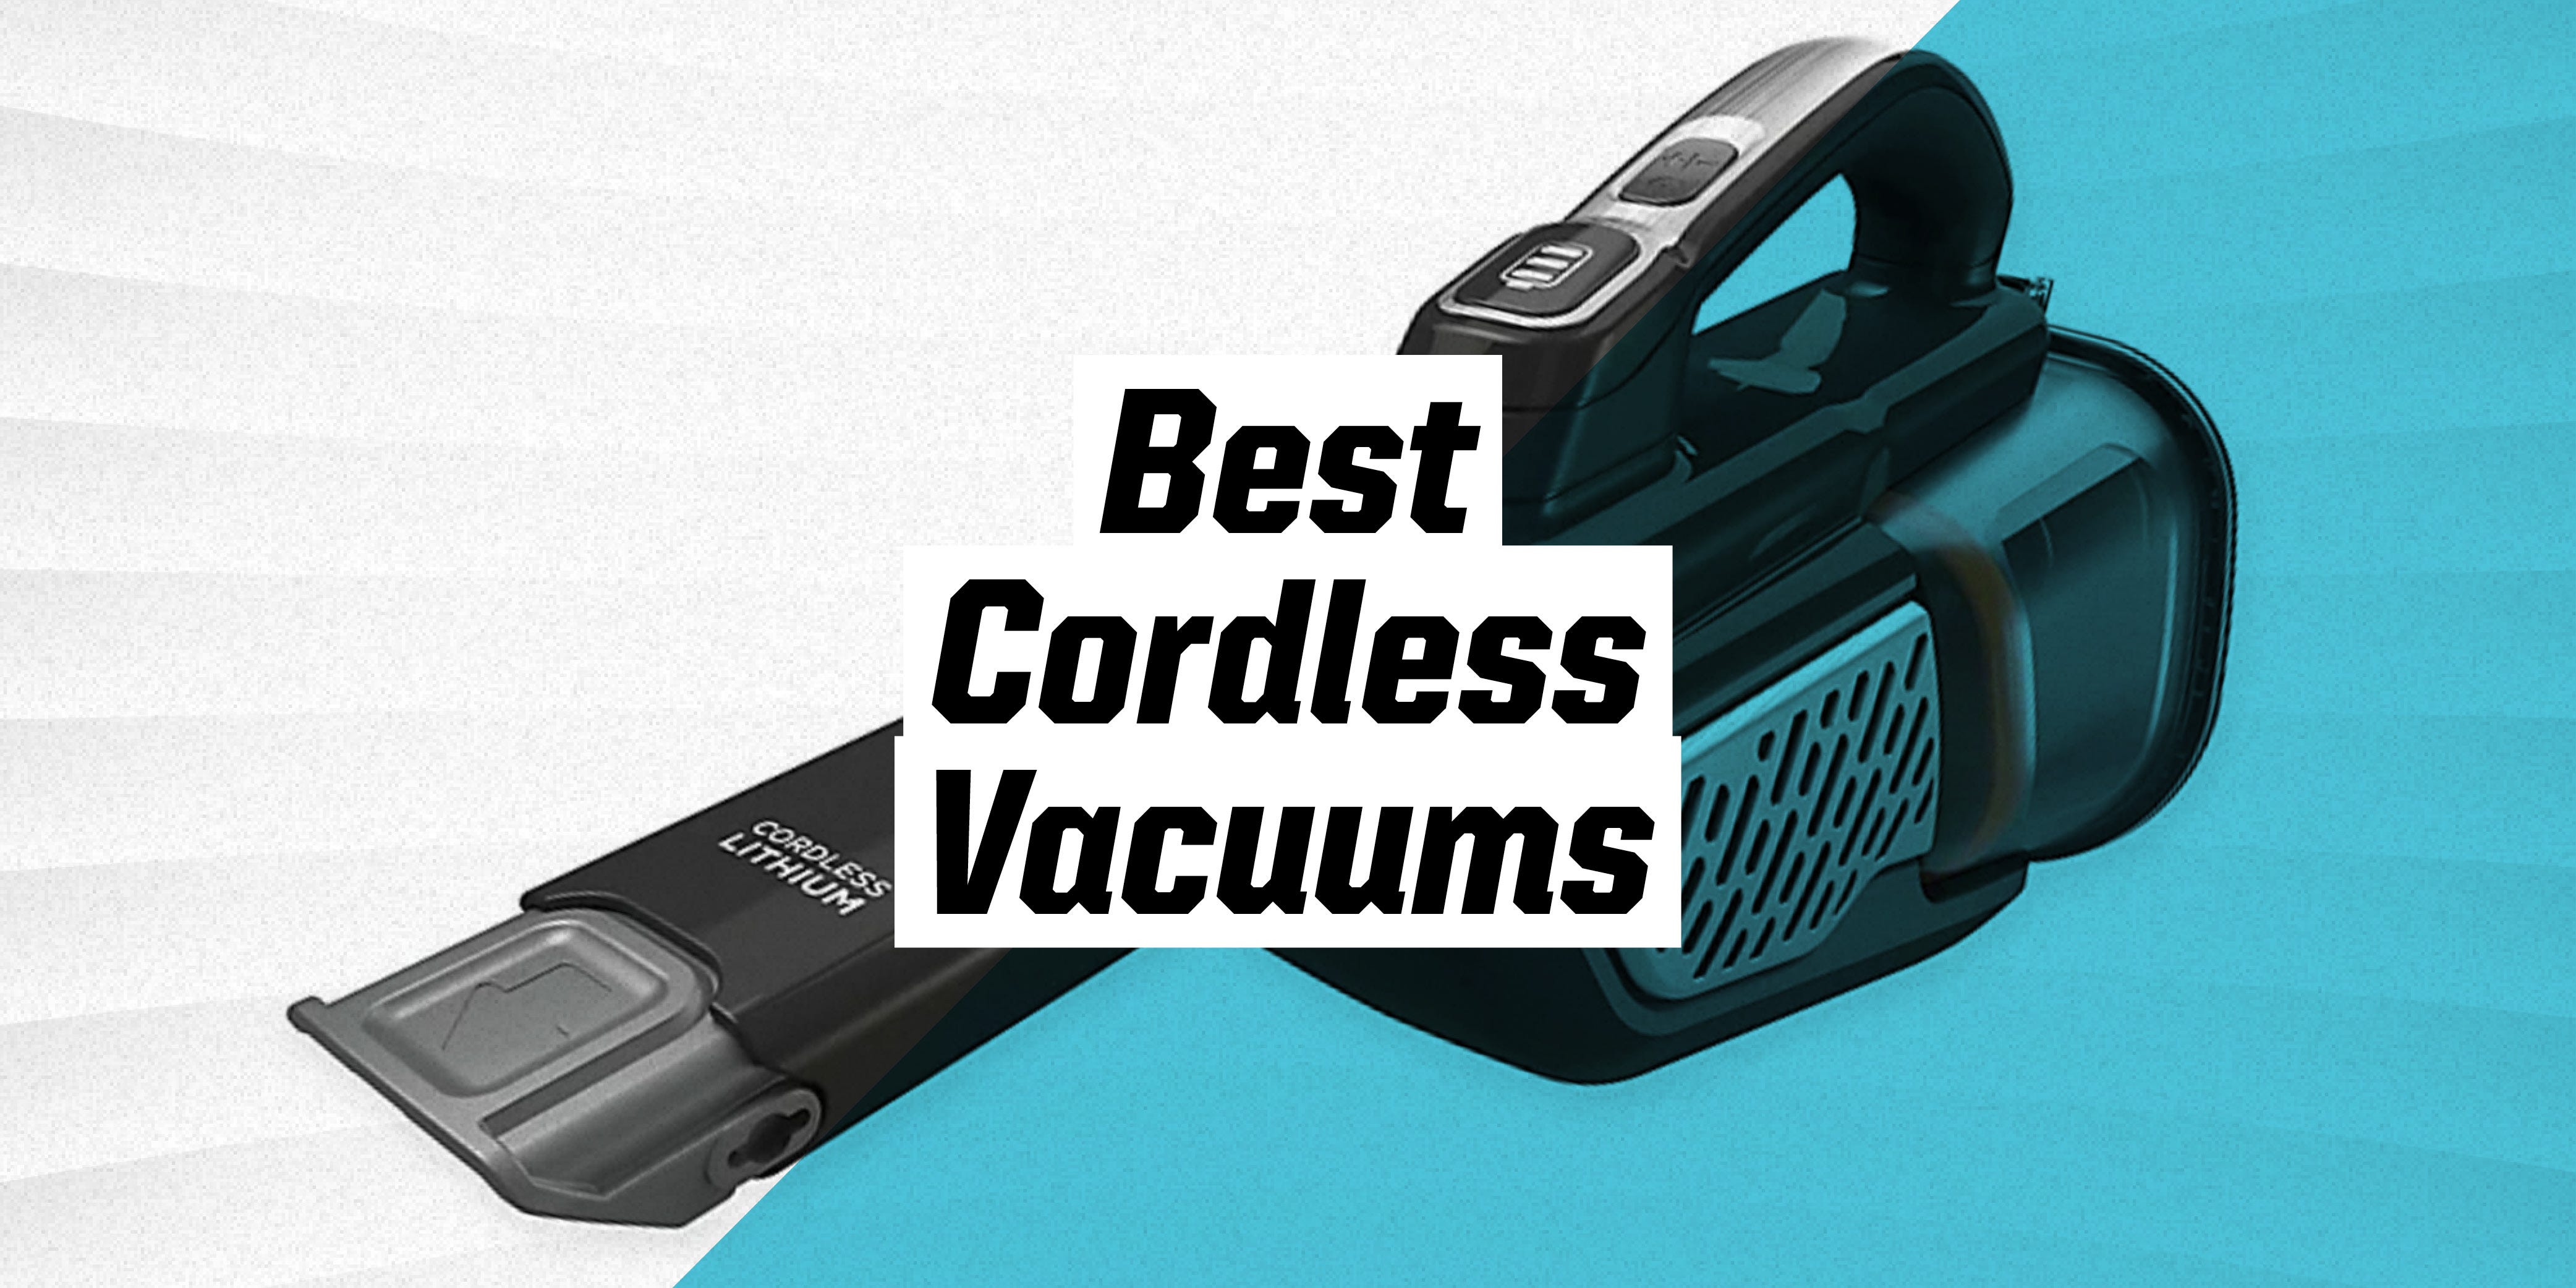 Clean Up Your Messy House Lightening-Fast With These Top-Rated Cordless Vacuums